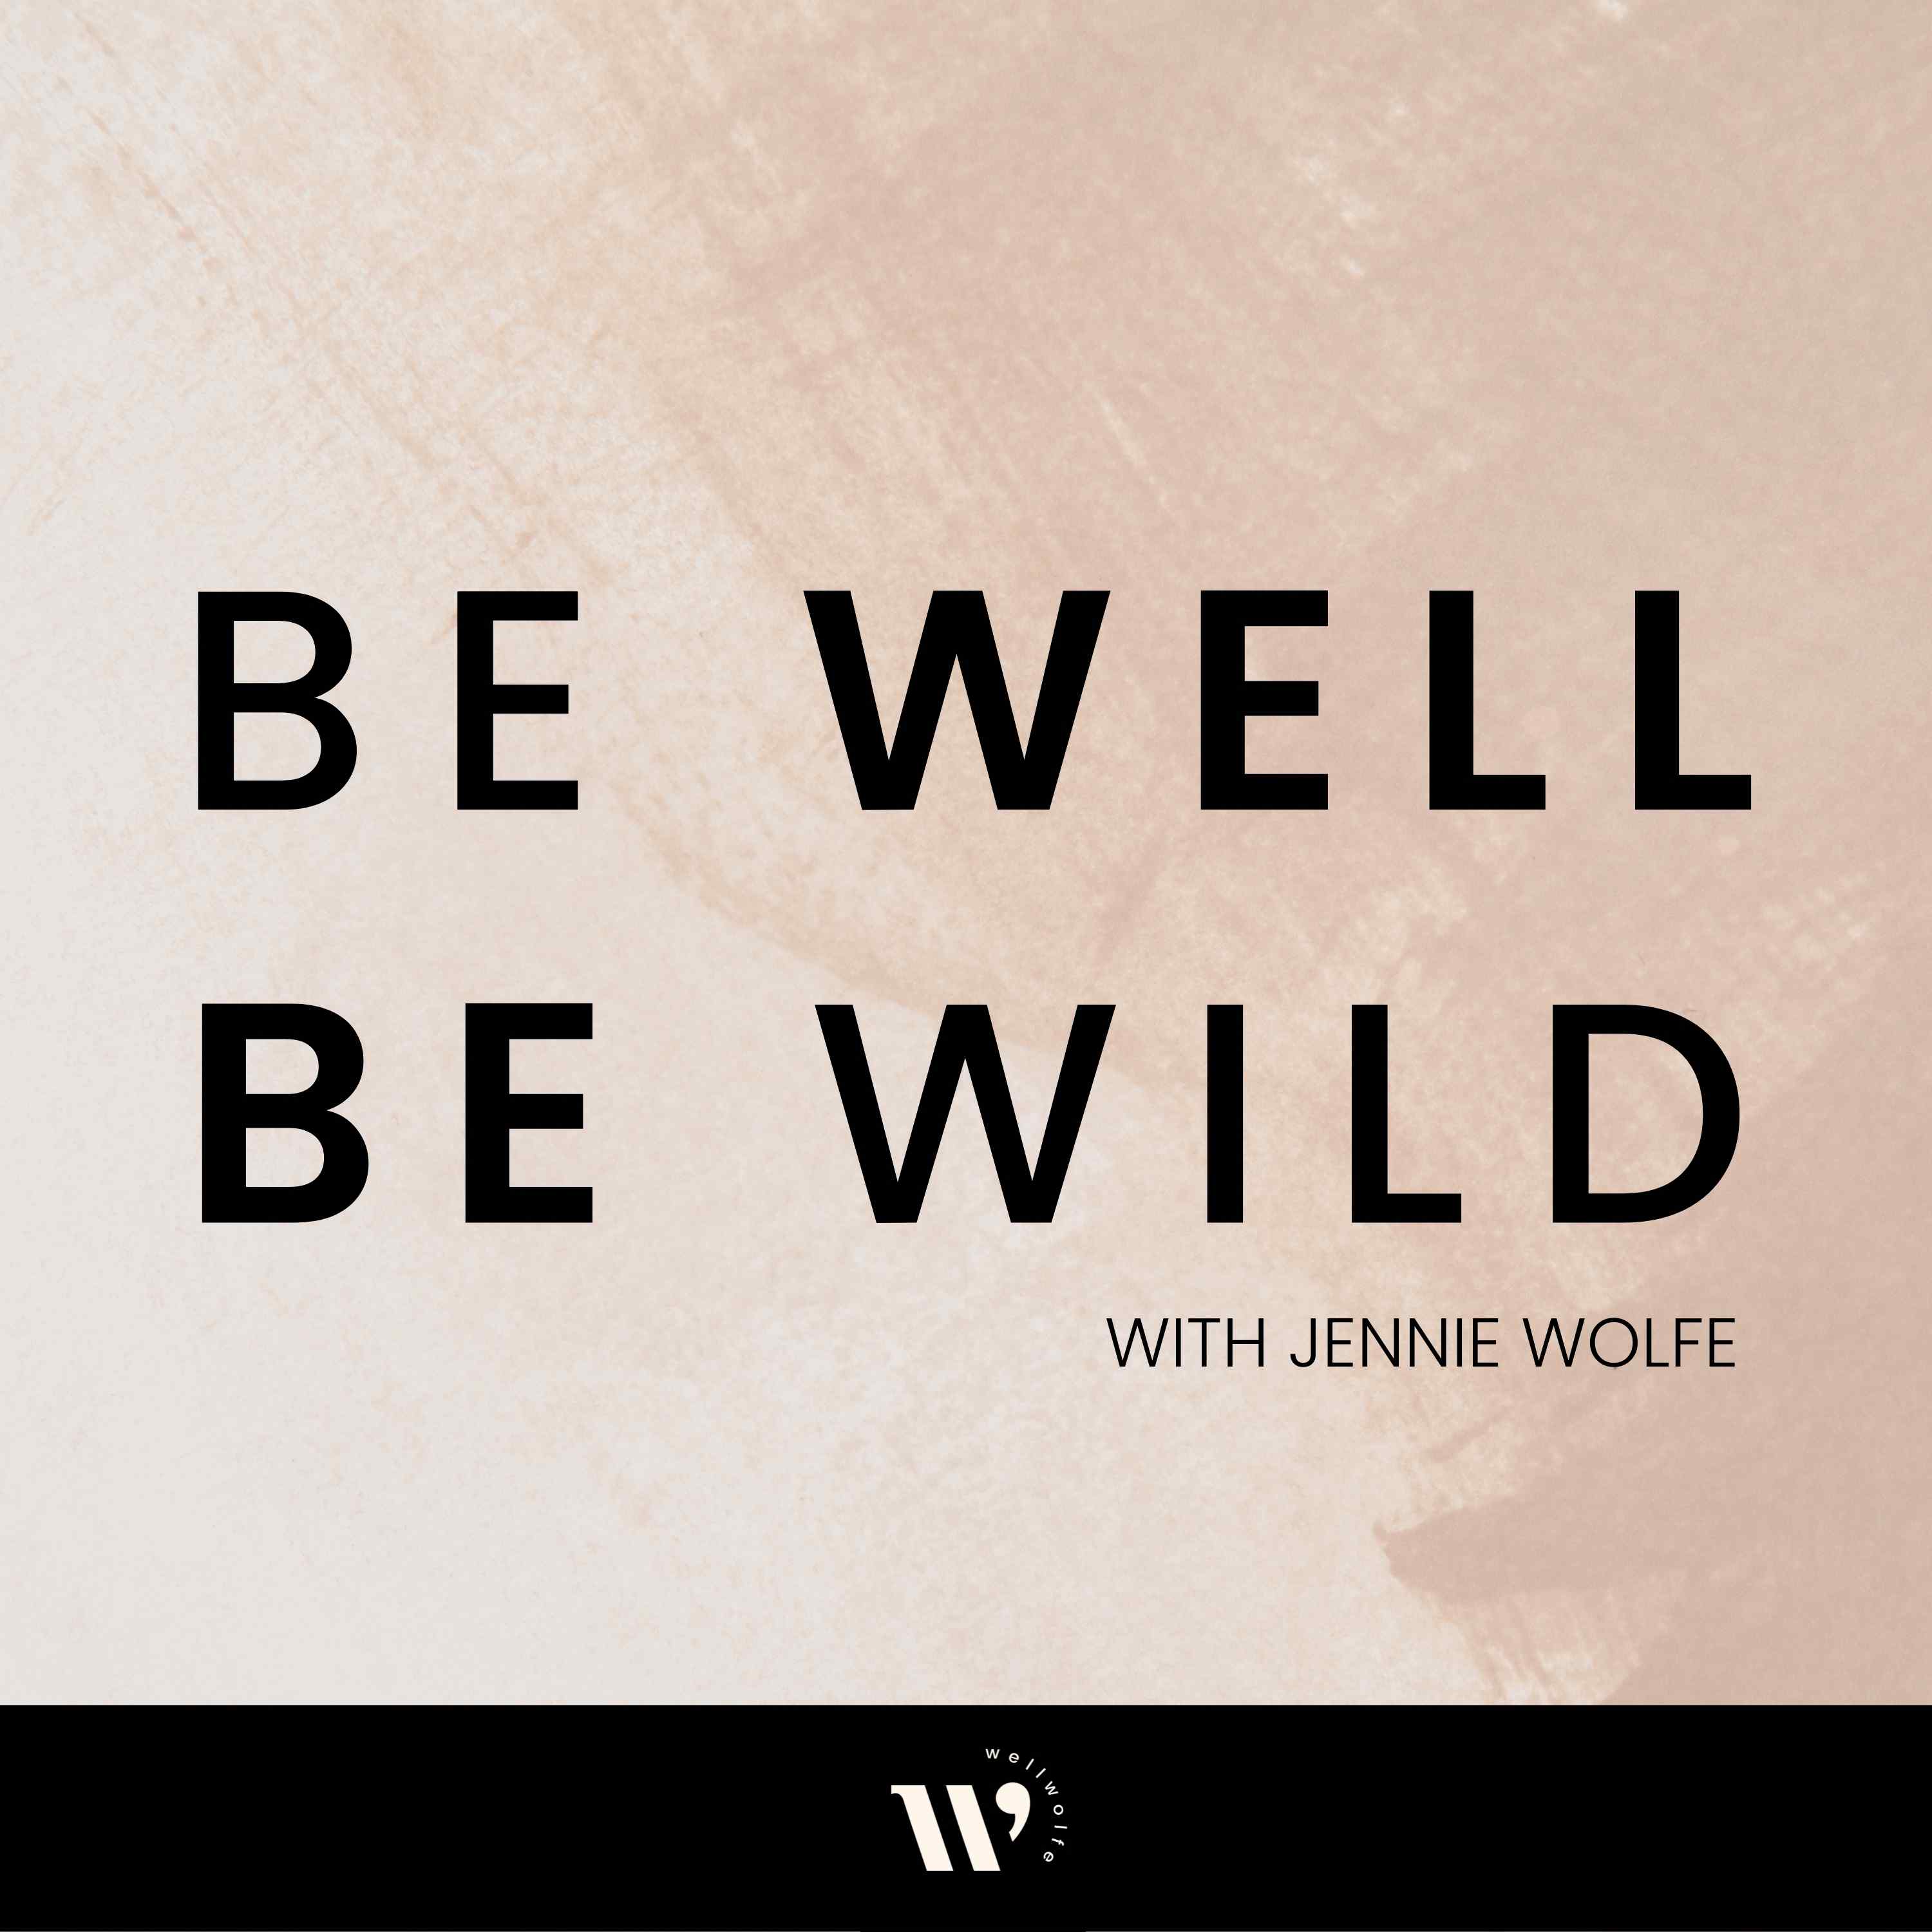 Be Well Be Wild